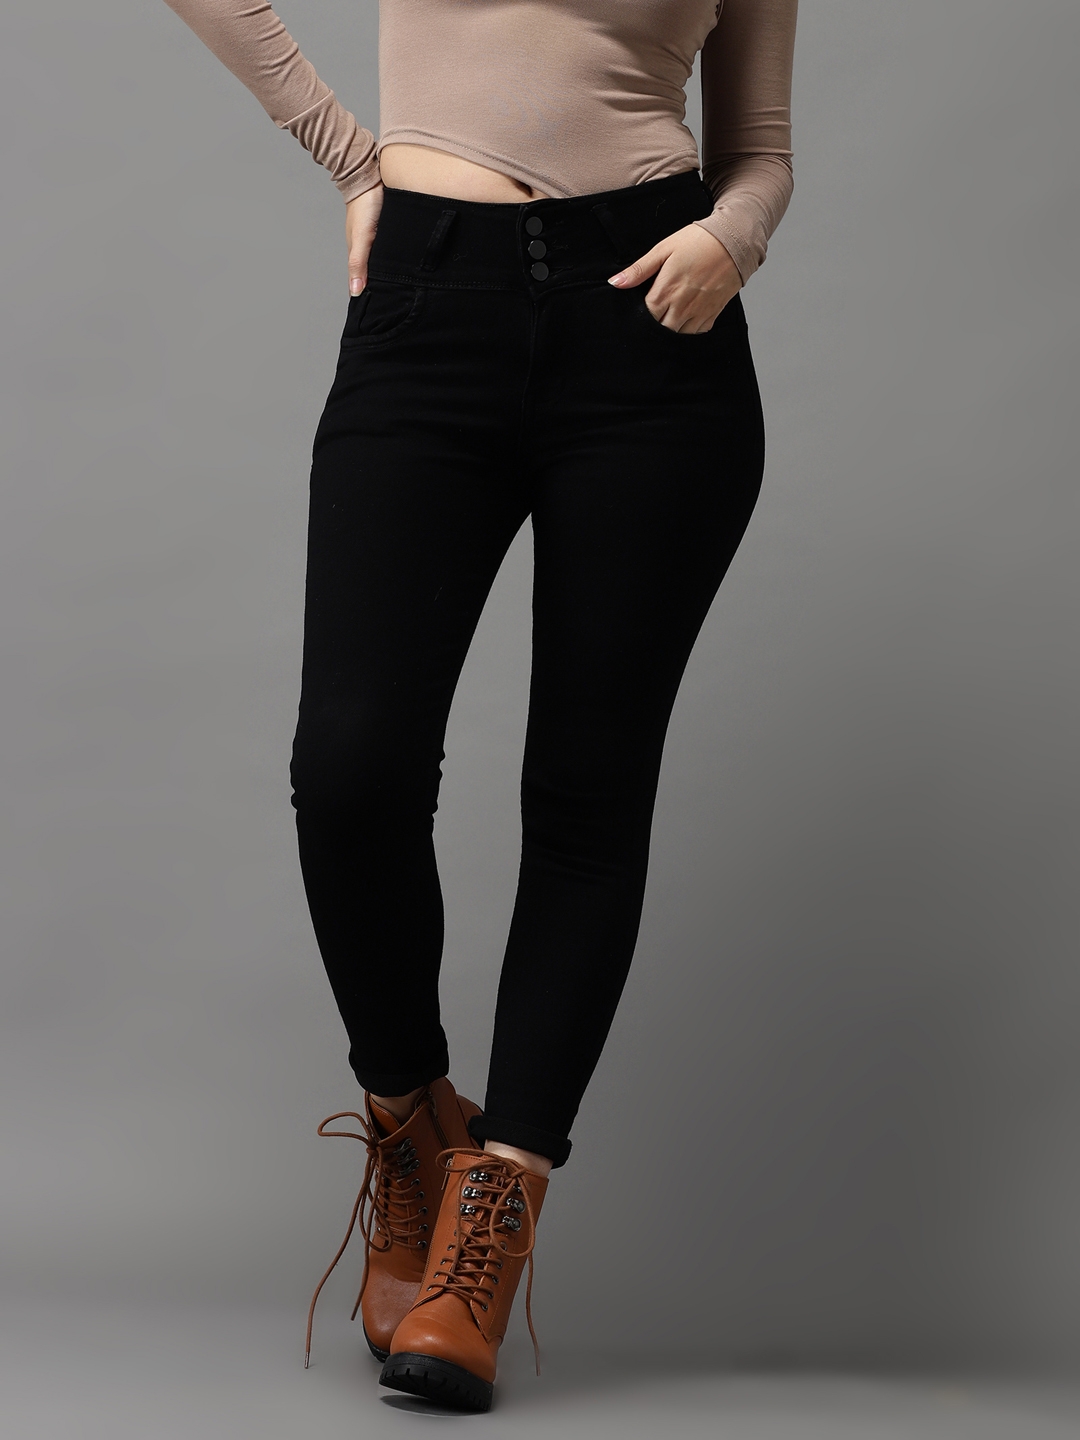 Showoff | SHOWOFF Women's High-Rise Black Clean Look Jeans